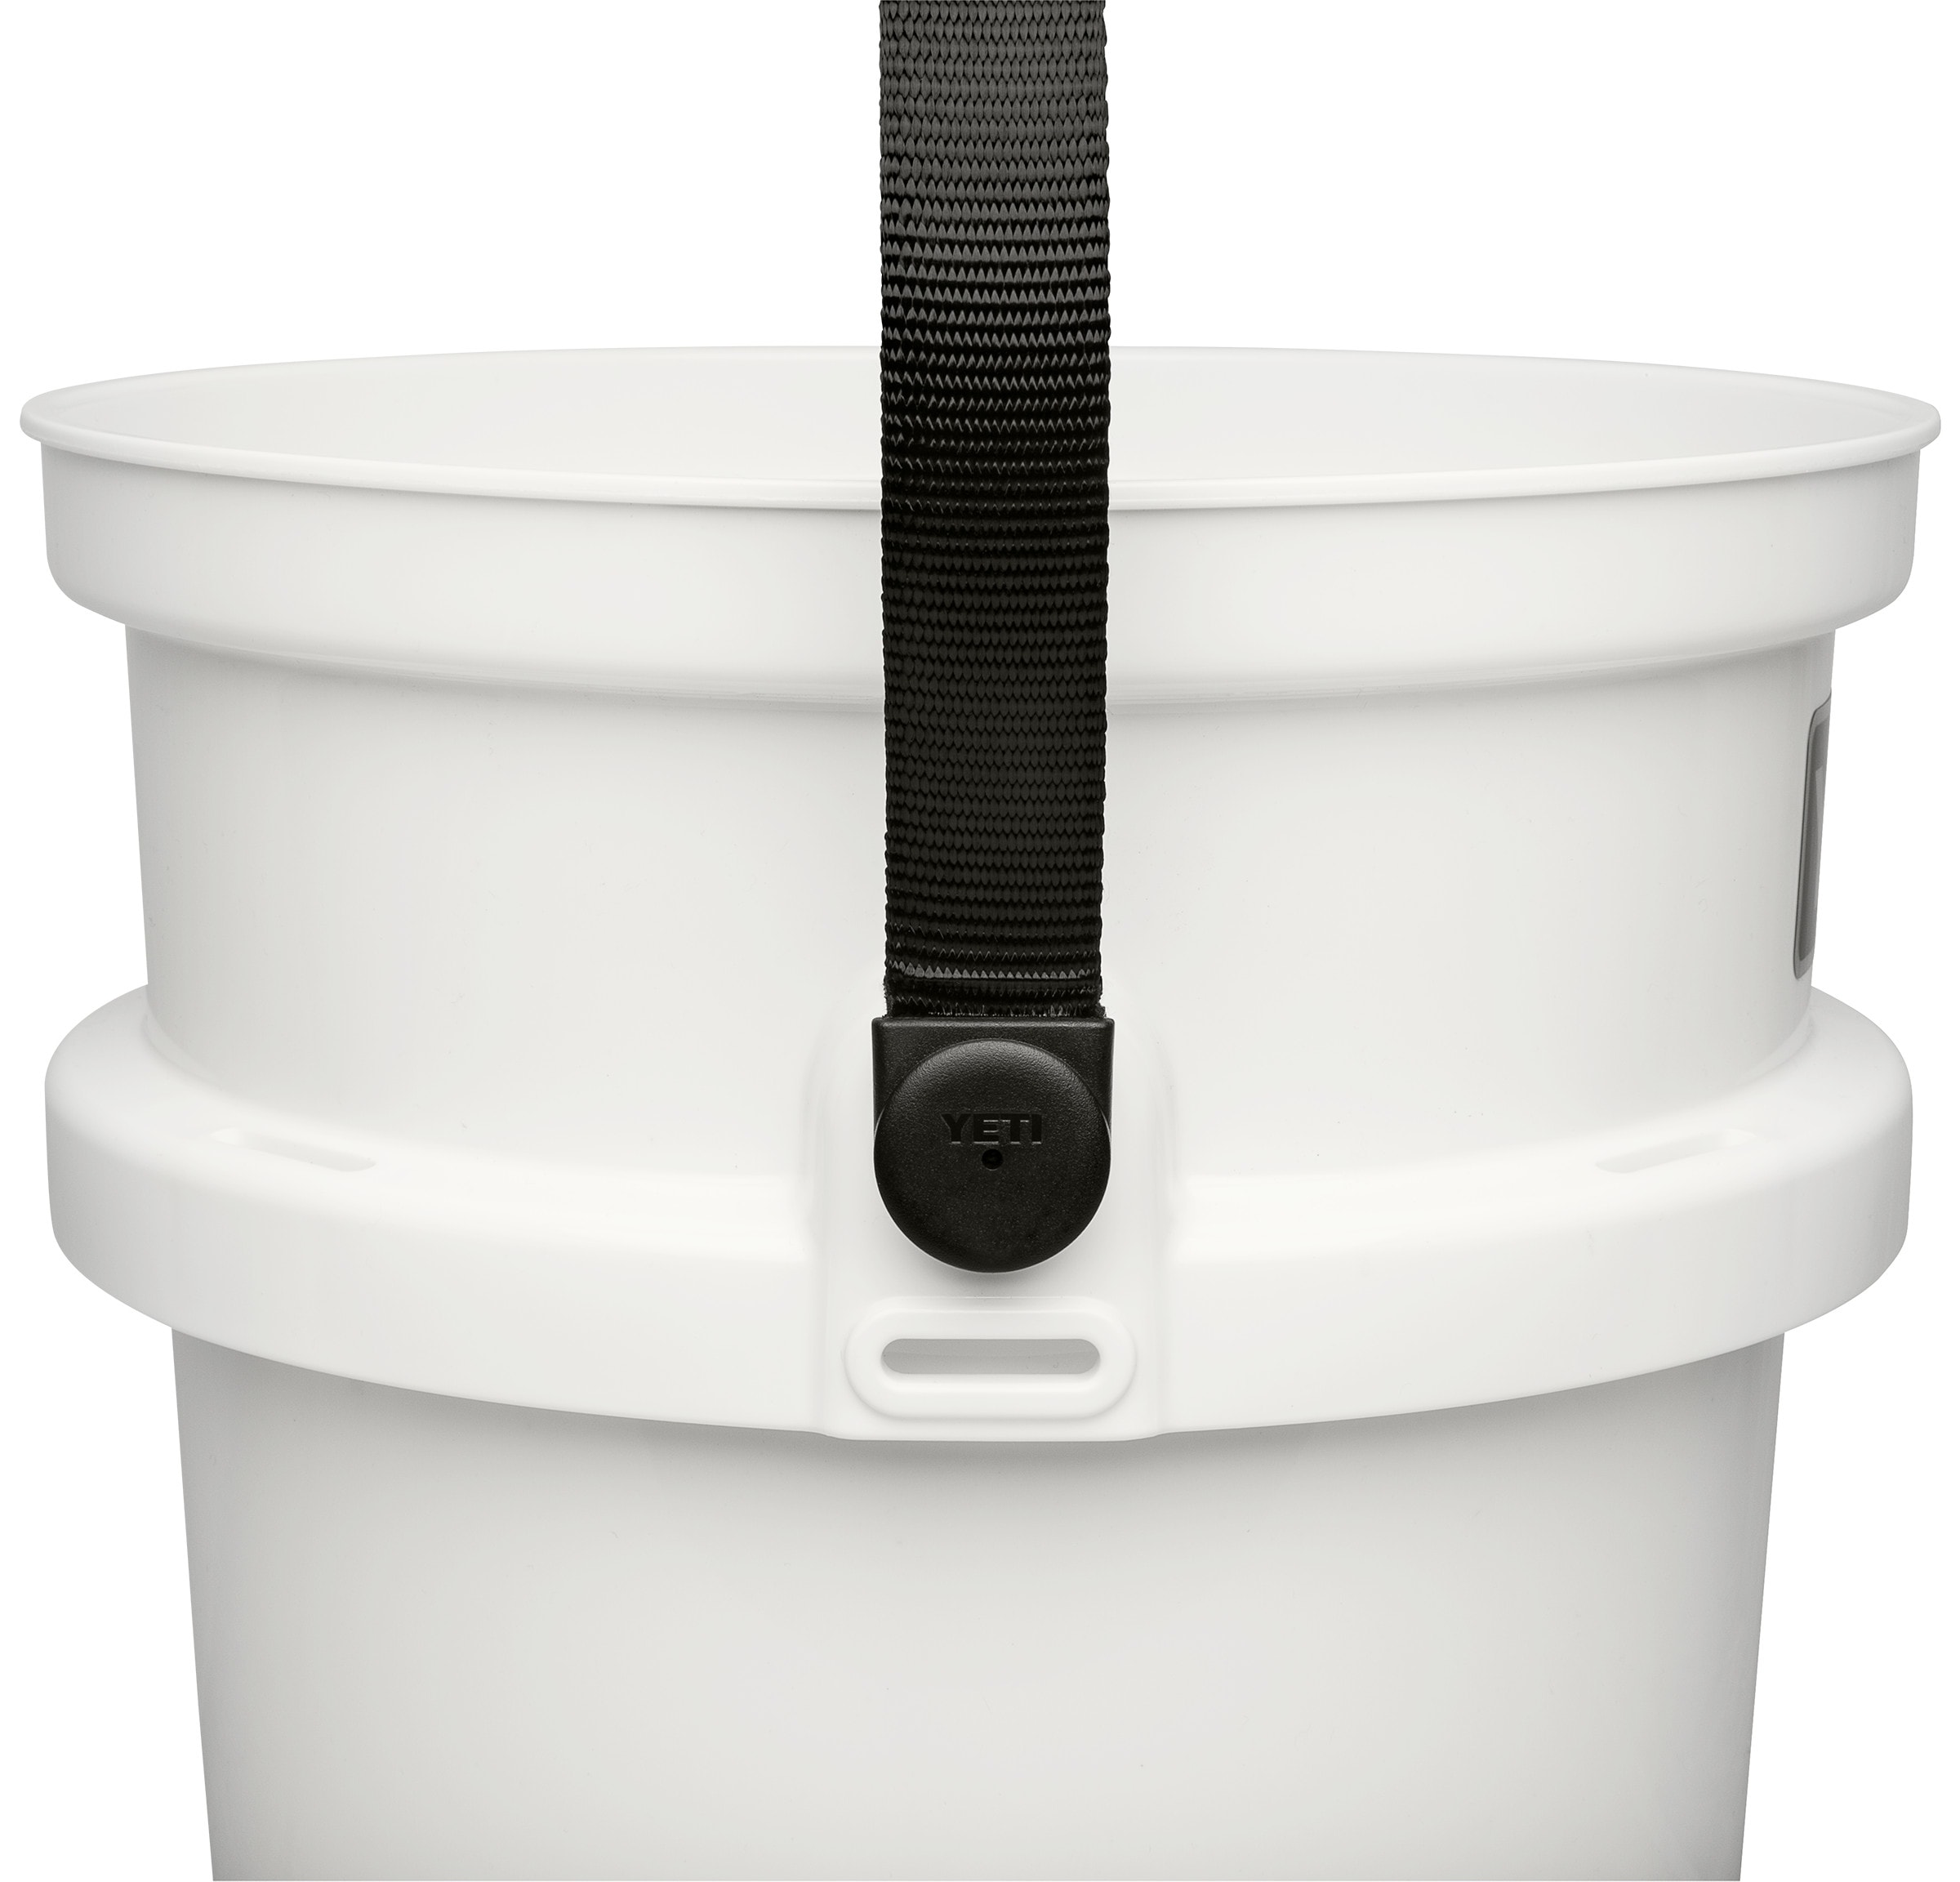 Gave in and got the Loadout bucket and lid. They are 25% off right